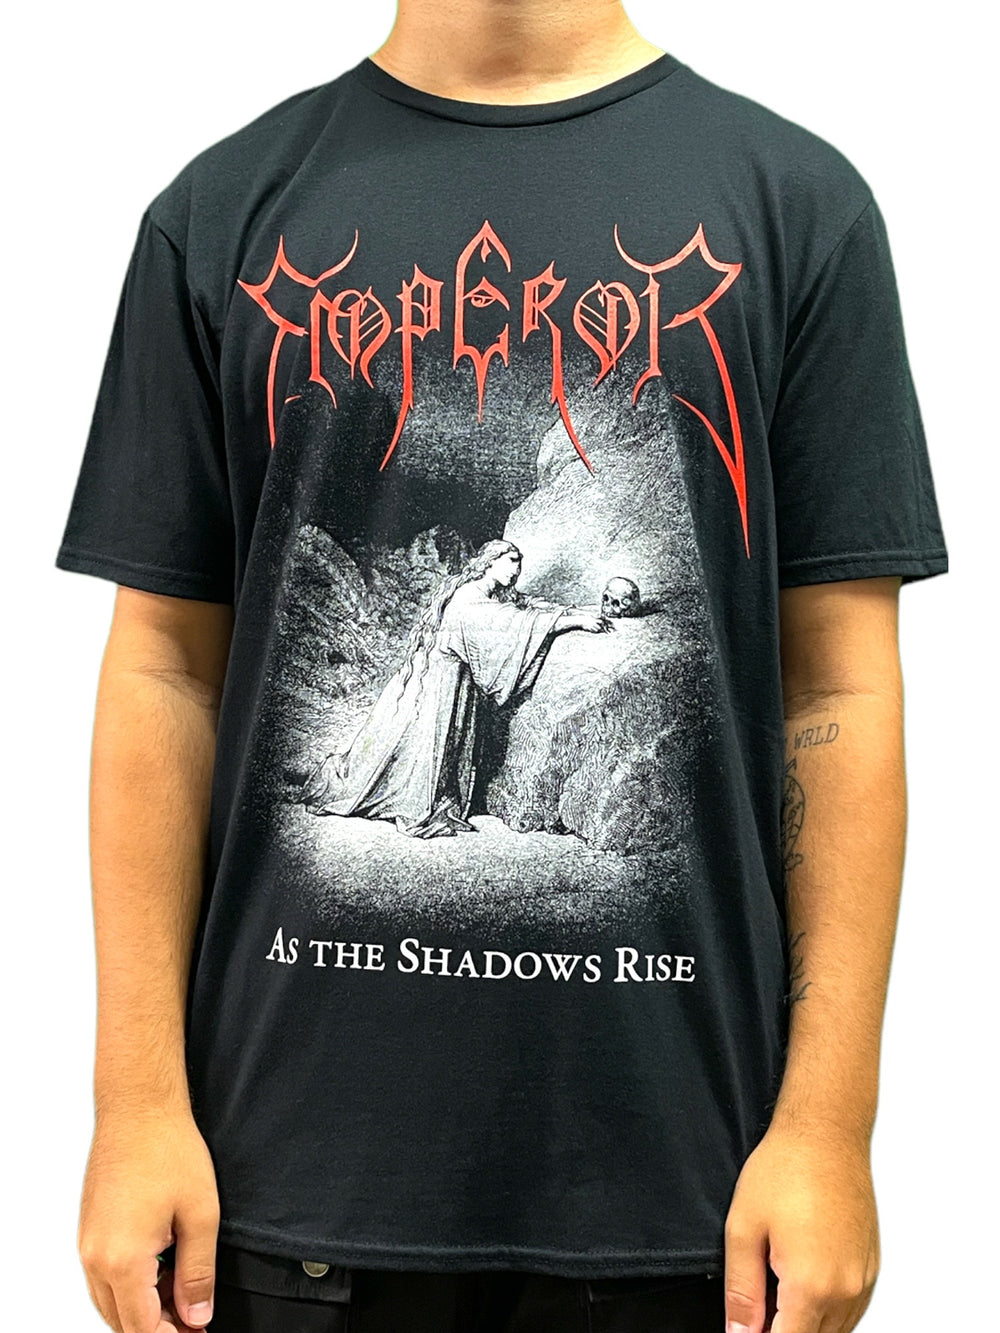 Emperor Shadows Rise Unisex Official T Shirt Brand New Various Sizes Black Metal